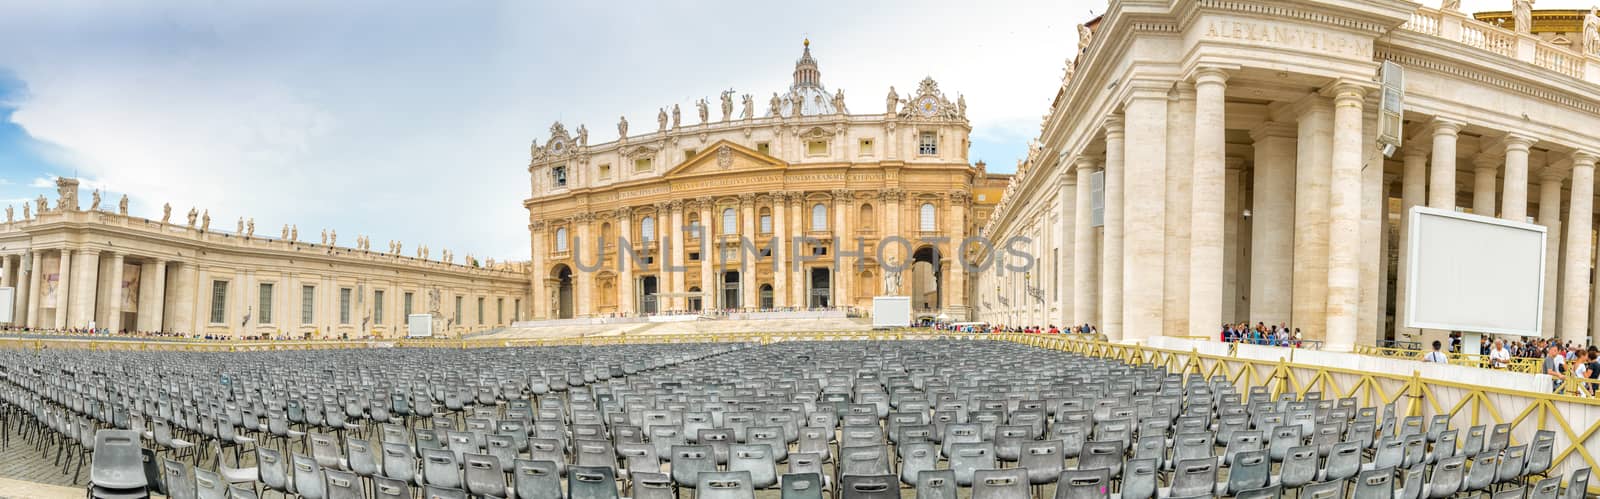 Panoramic view of St. Peter Square, Vatican City by jovannig